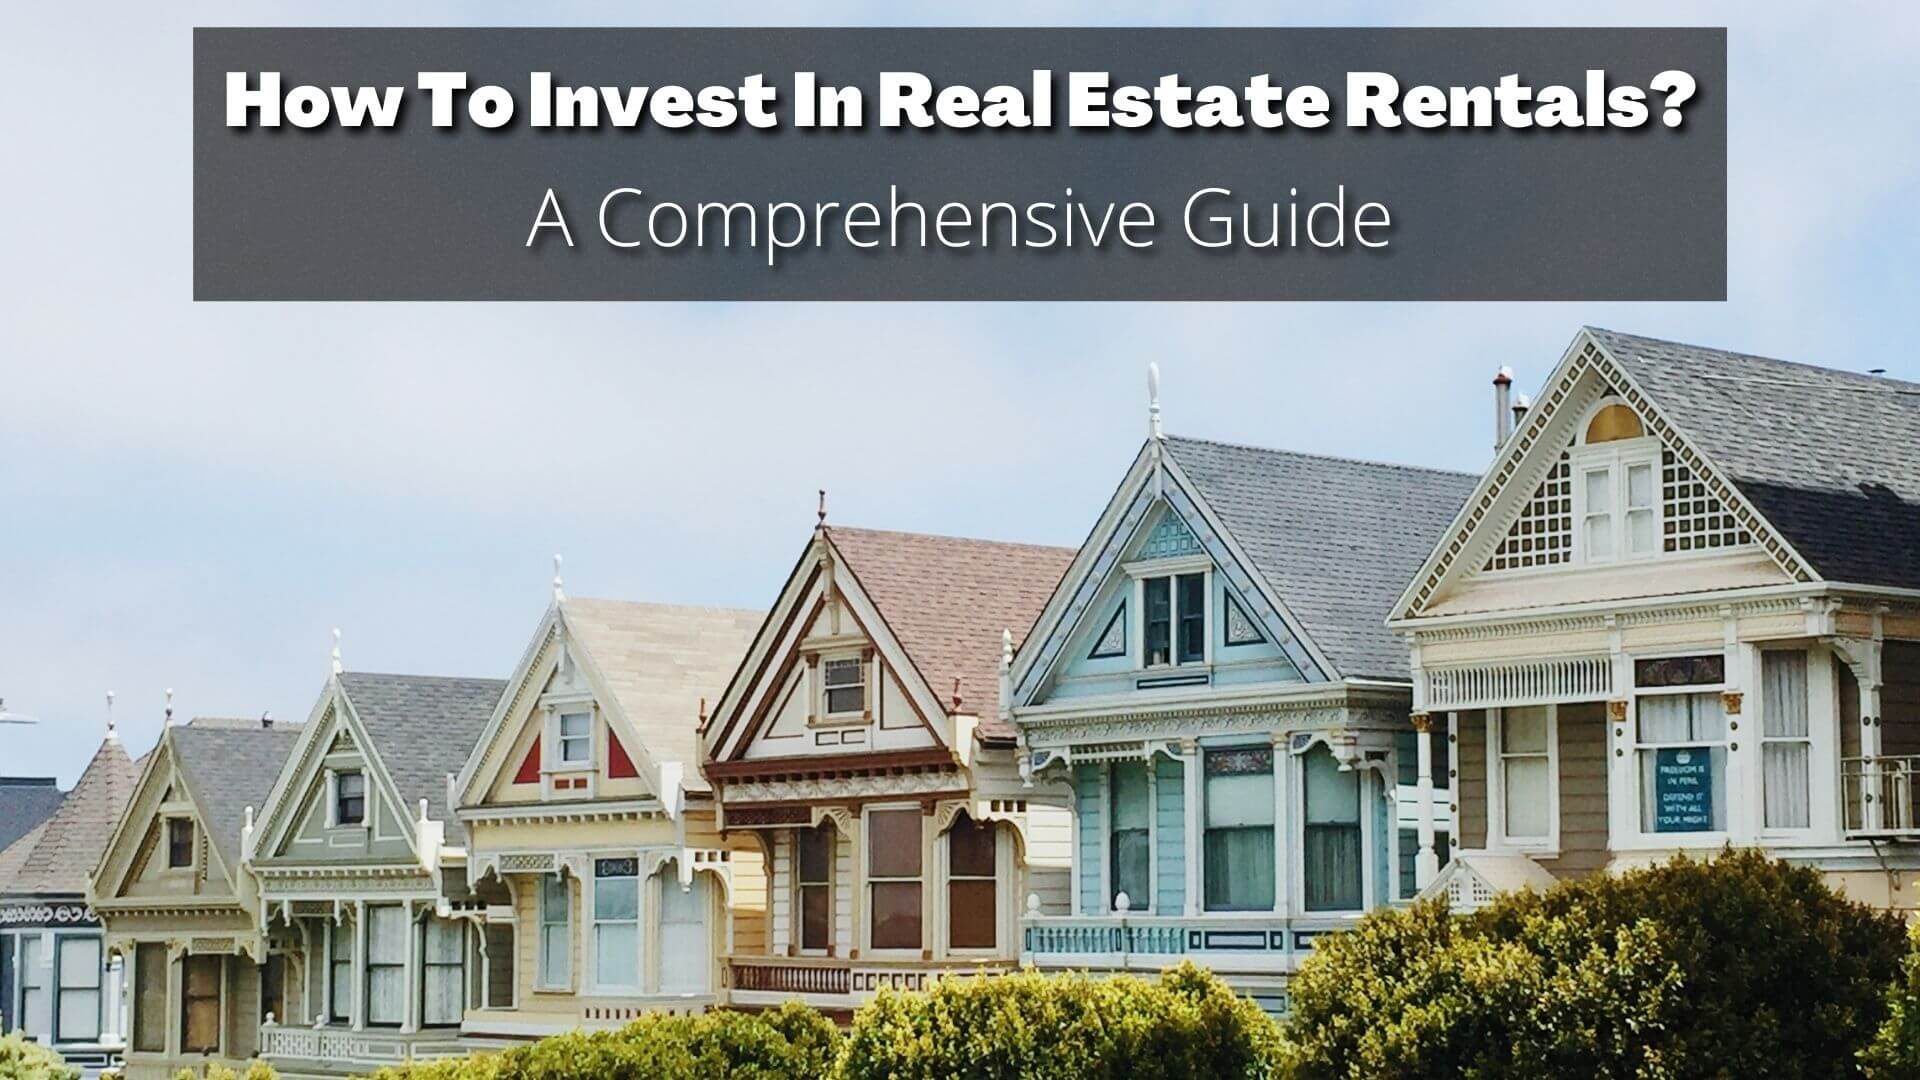 Are you looking for an investment property? If so, then you might want to consider real estate rentals. Here's a guide for you.